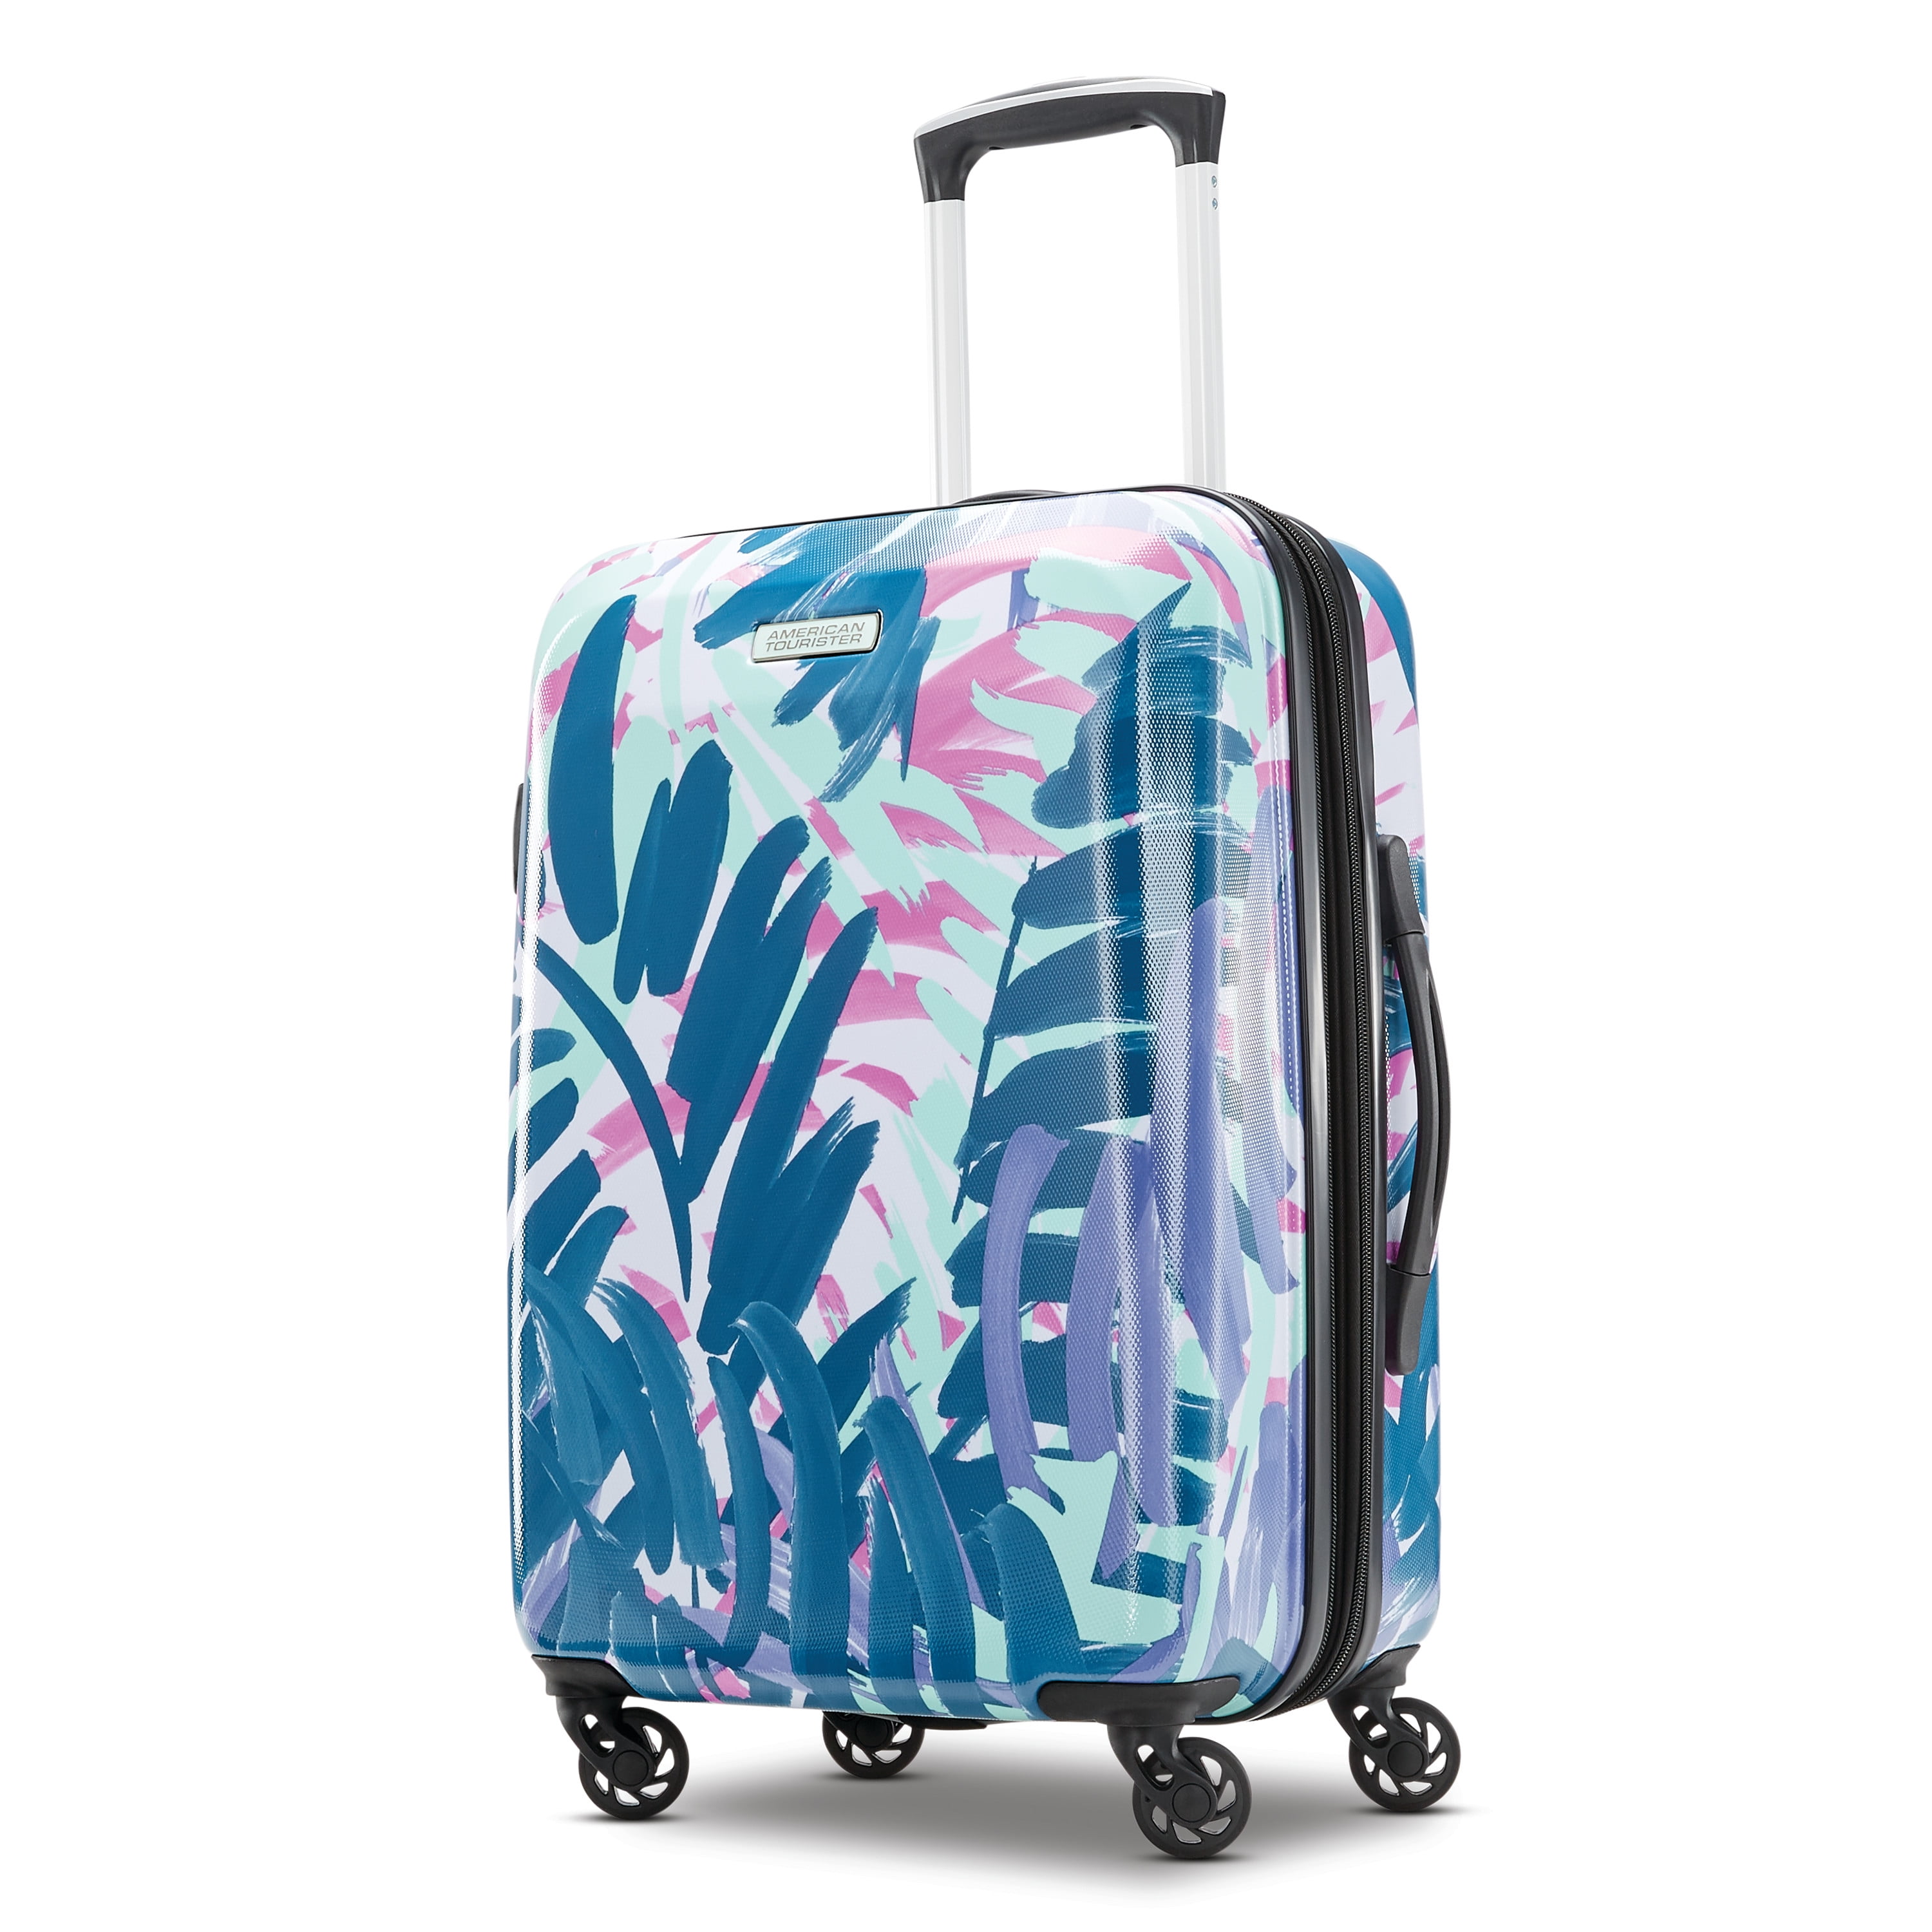 American Tourister Moonlight Expandable Hardside Luggage with Spinner Wheels